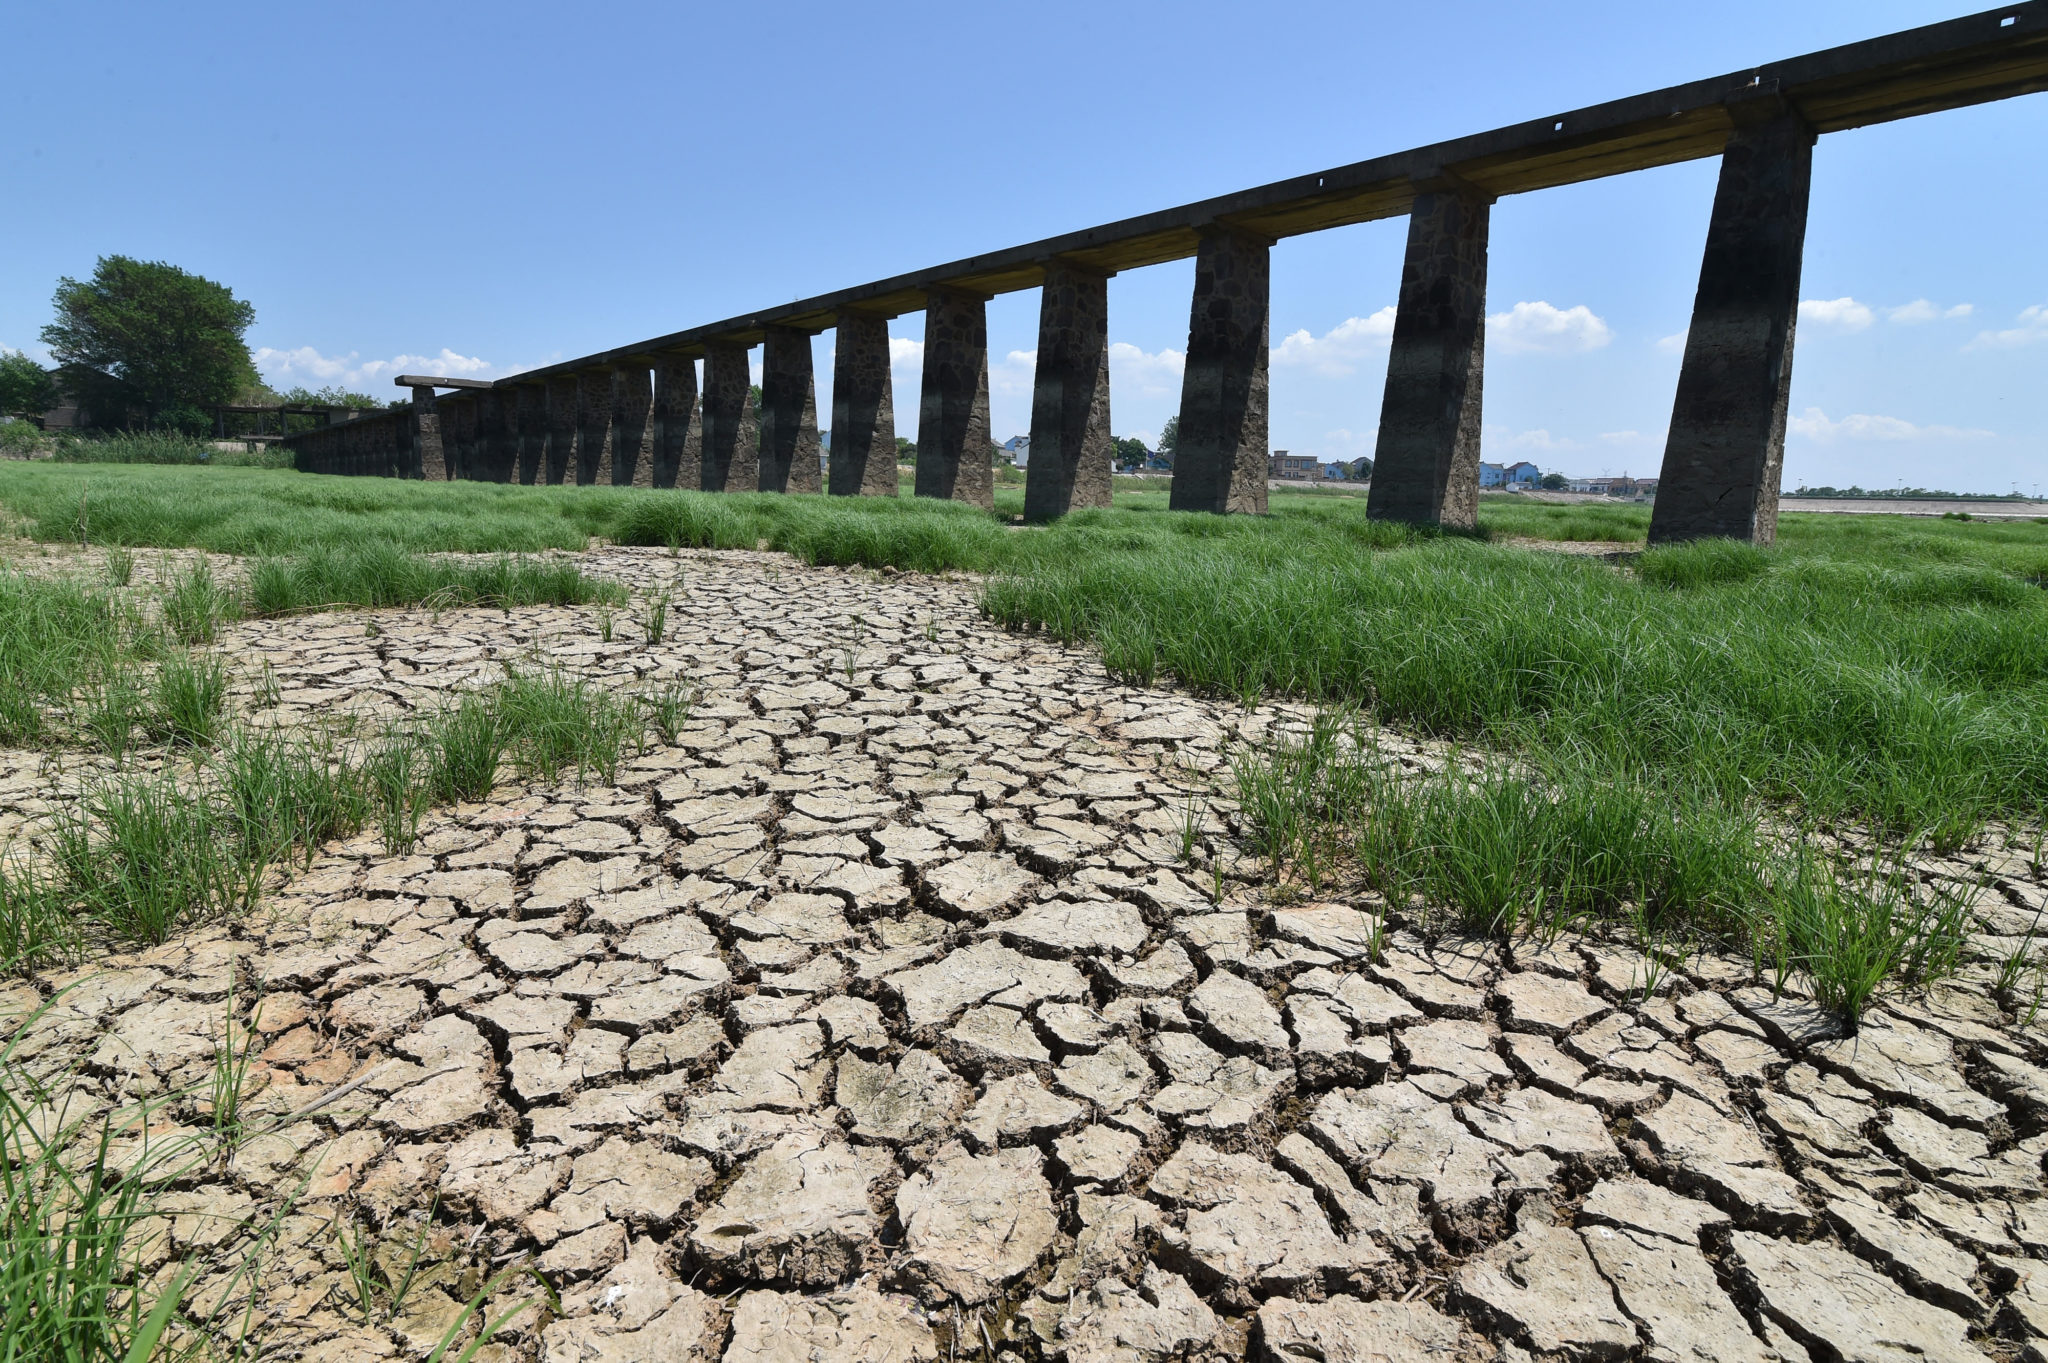 Half of China hit by drought in worst heatwave on record Inquirer News